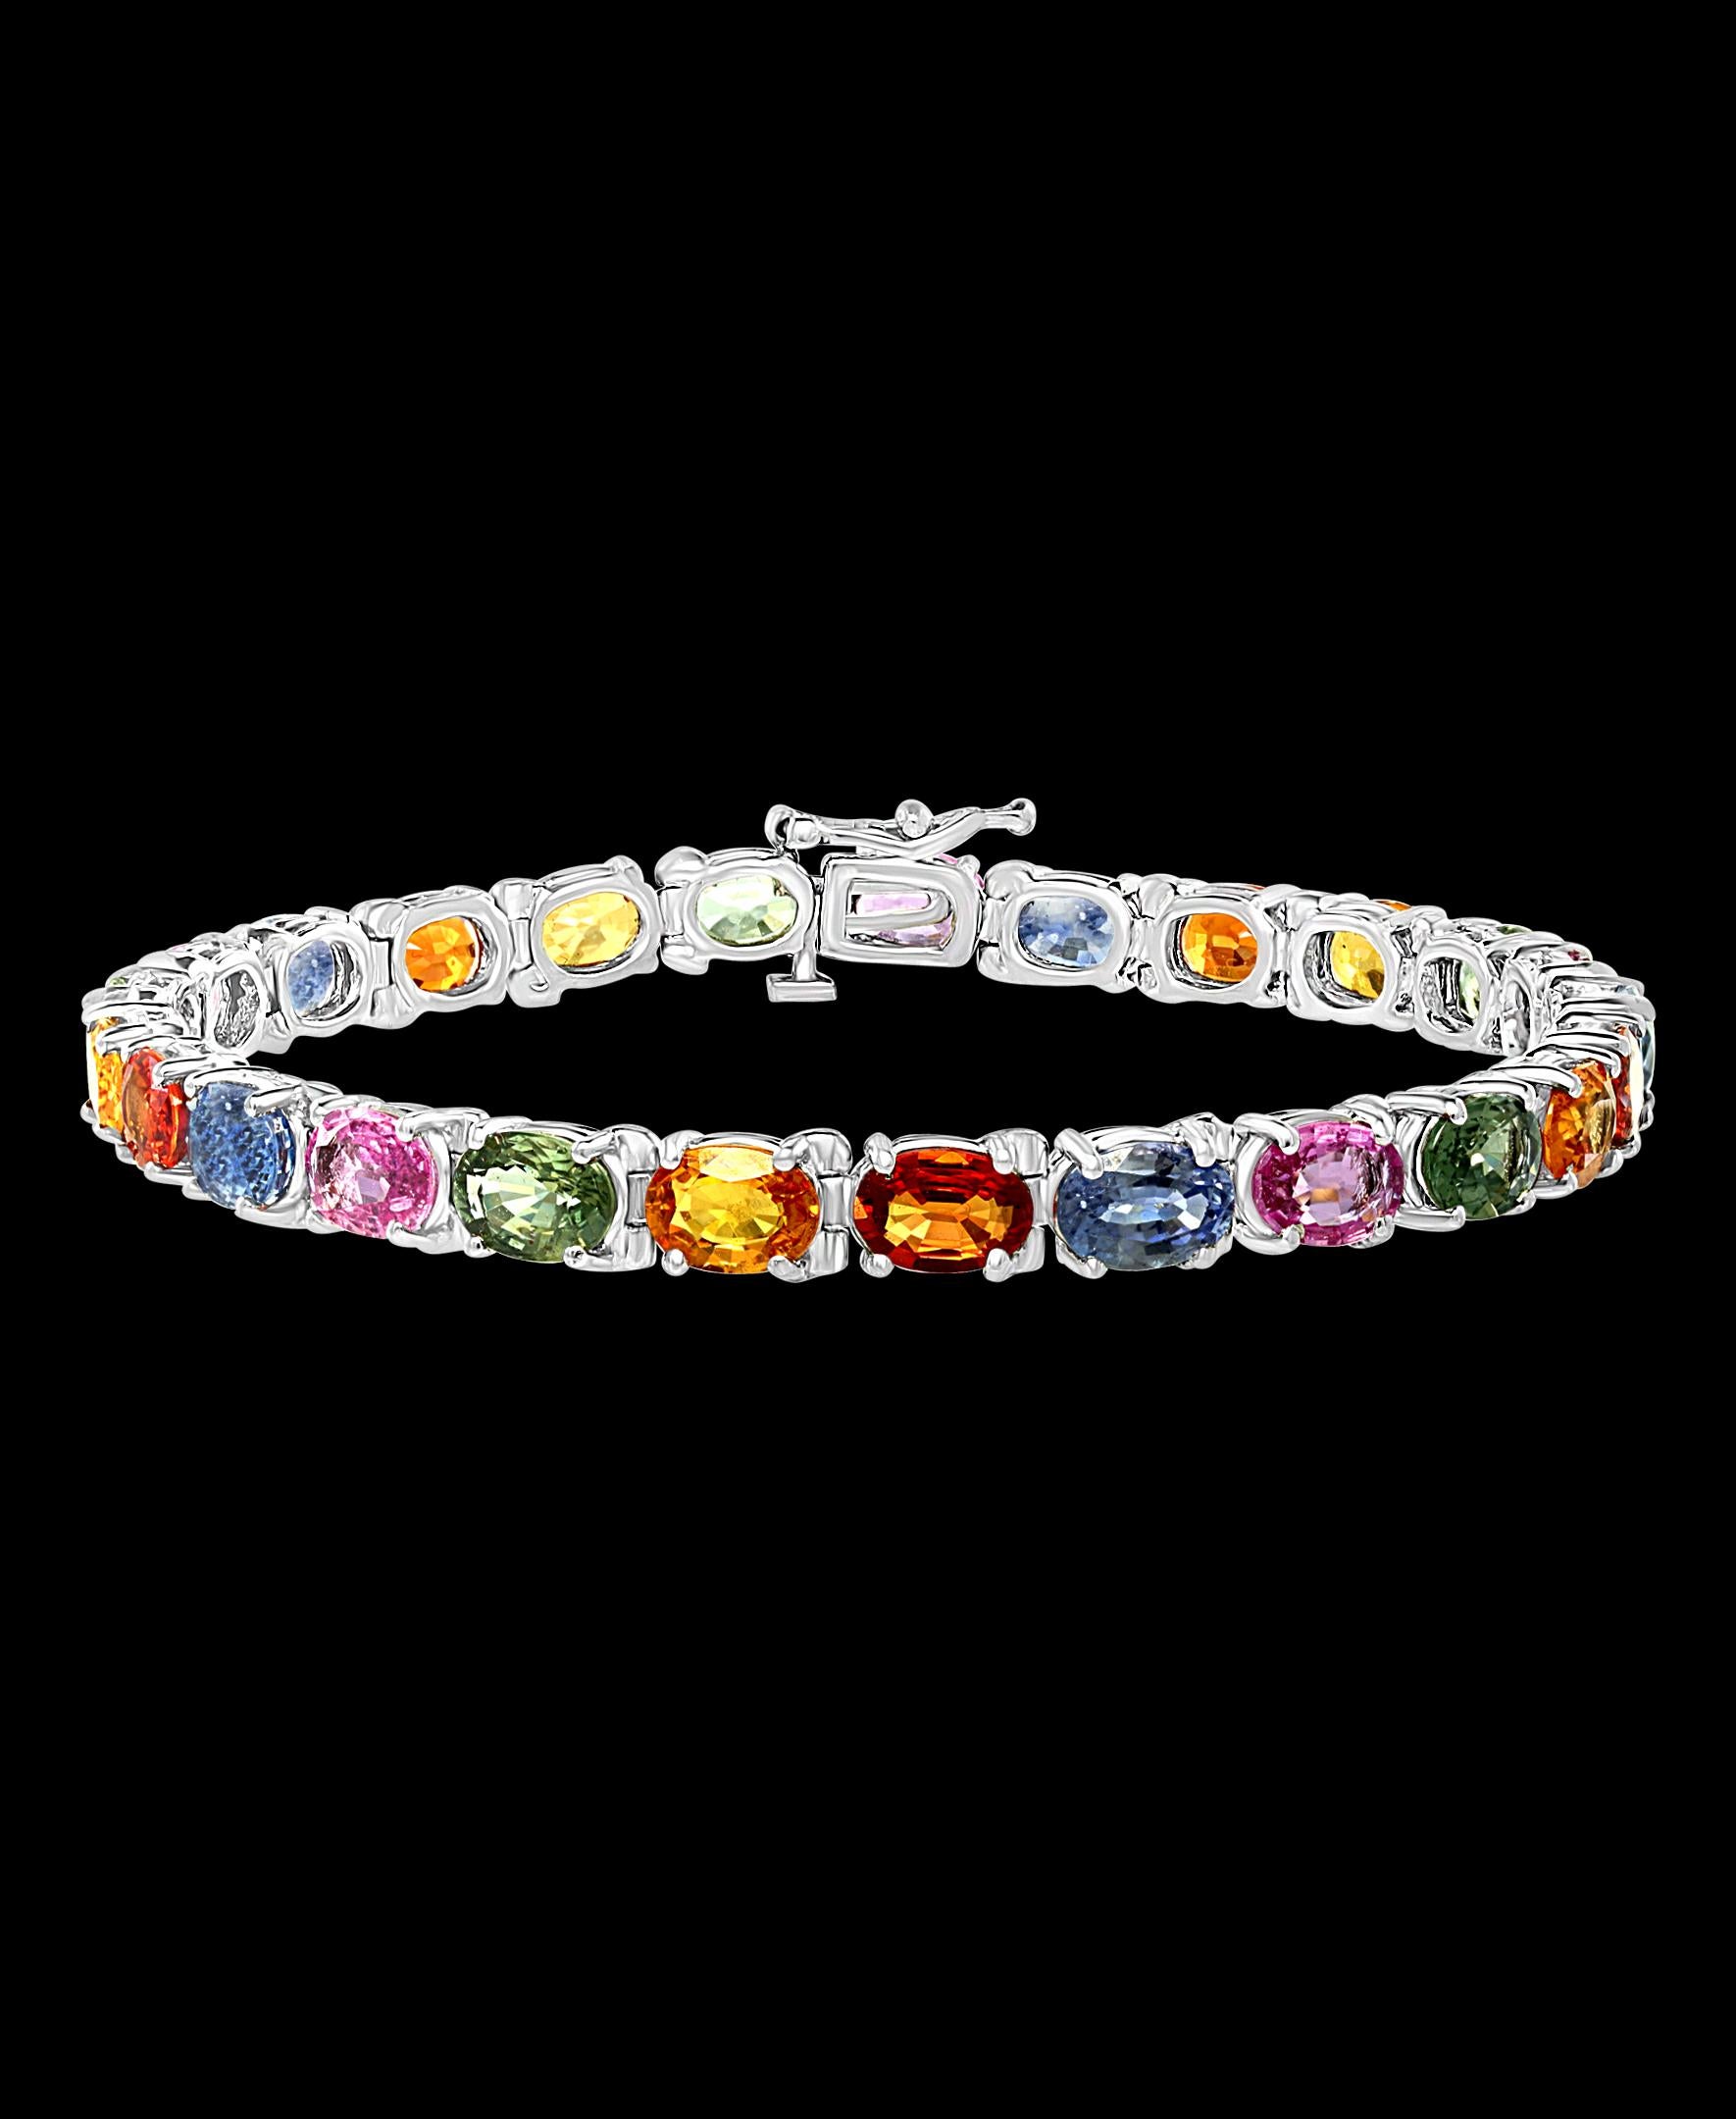  This exceptionally affordable Tennis  bracelet has  25 stones of oval Sapphires  . 
 Sapphires  colors are Pink, Blue, Orange, Yellow, Green
Beautiful colors , very Vibrant
Size of the stone is approximately 7X5 mm
Total weight of these natural